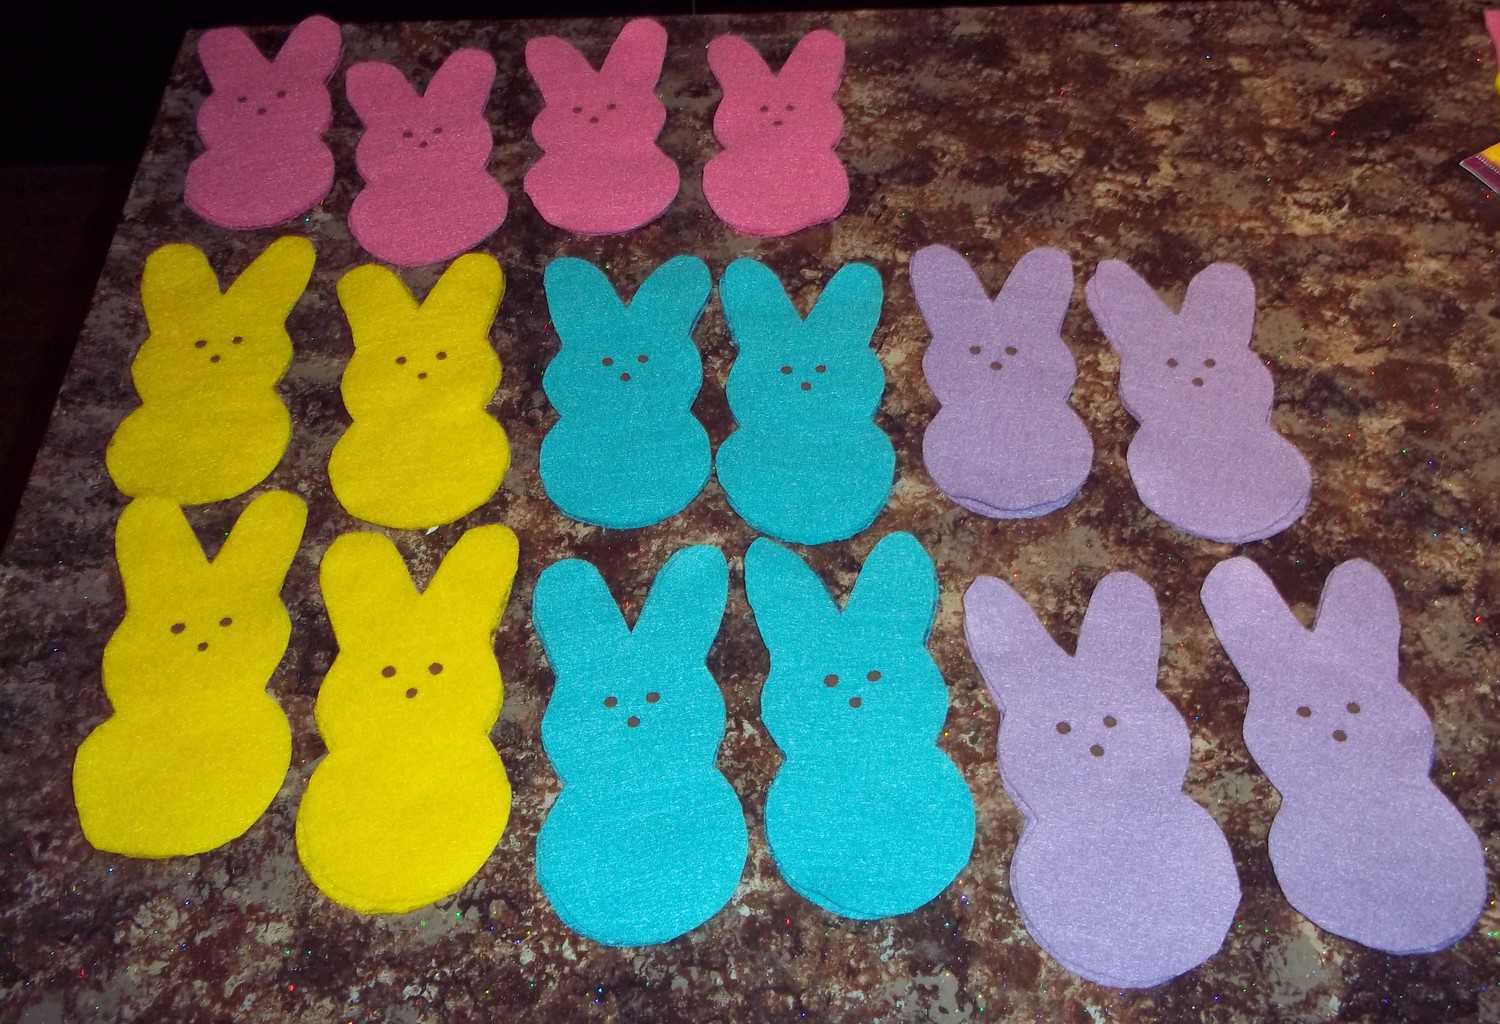 Follow this easy Peeps craft tutorial to make your own Peeps bunny banner or use the free printable pattern to create your own Easter Peeps craft ideas.